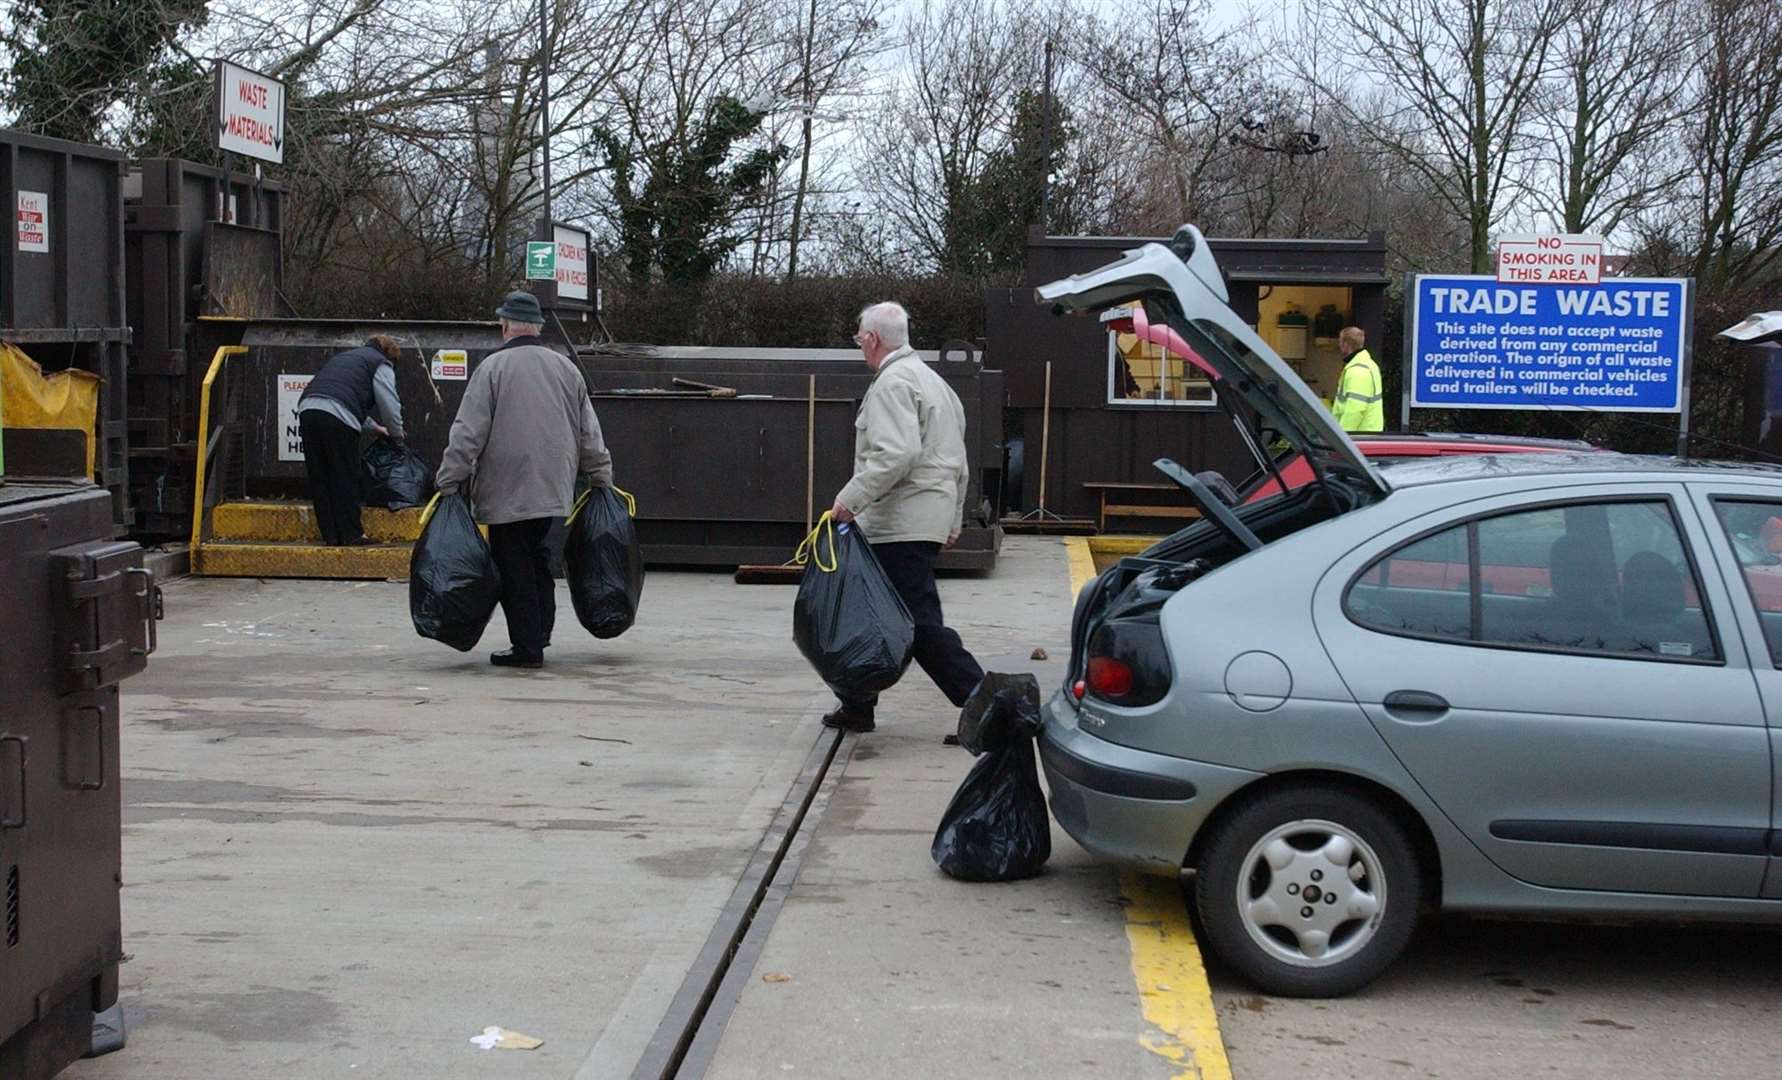 Richborough recycling centre, near Sandwich, is earmarked to permanently close under all options being considered